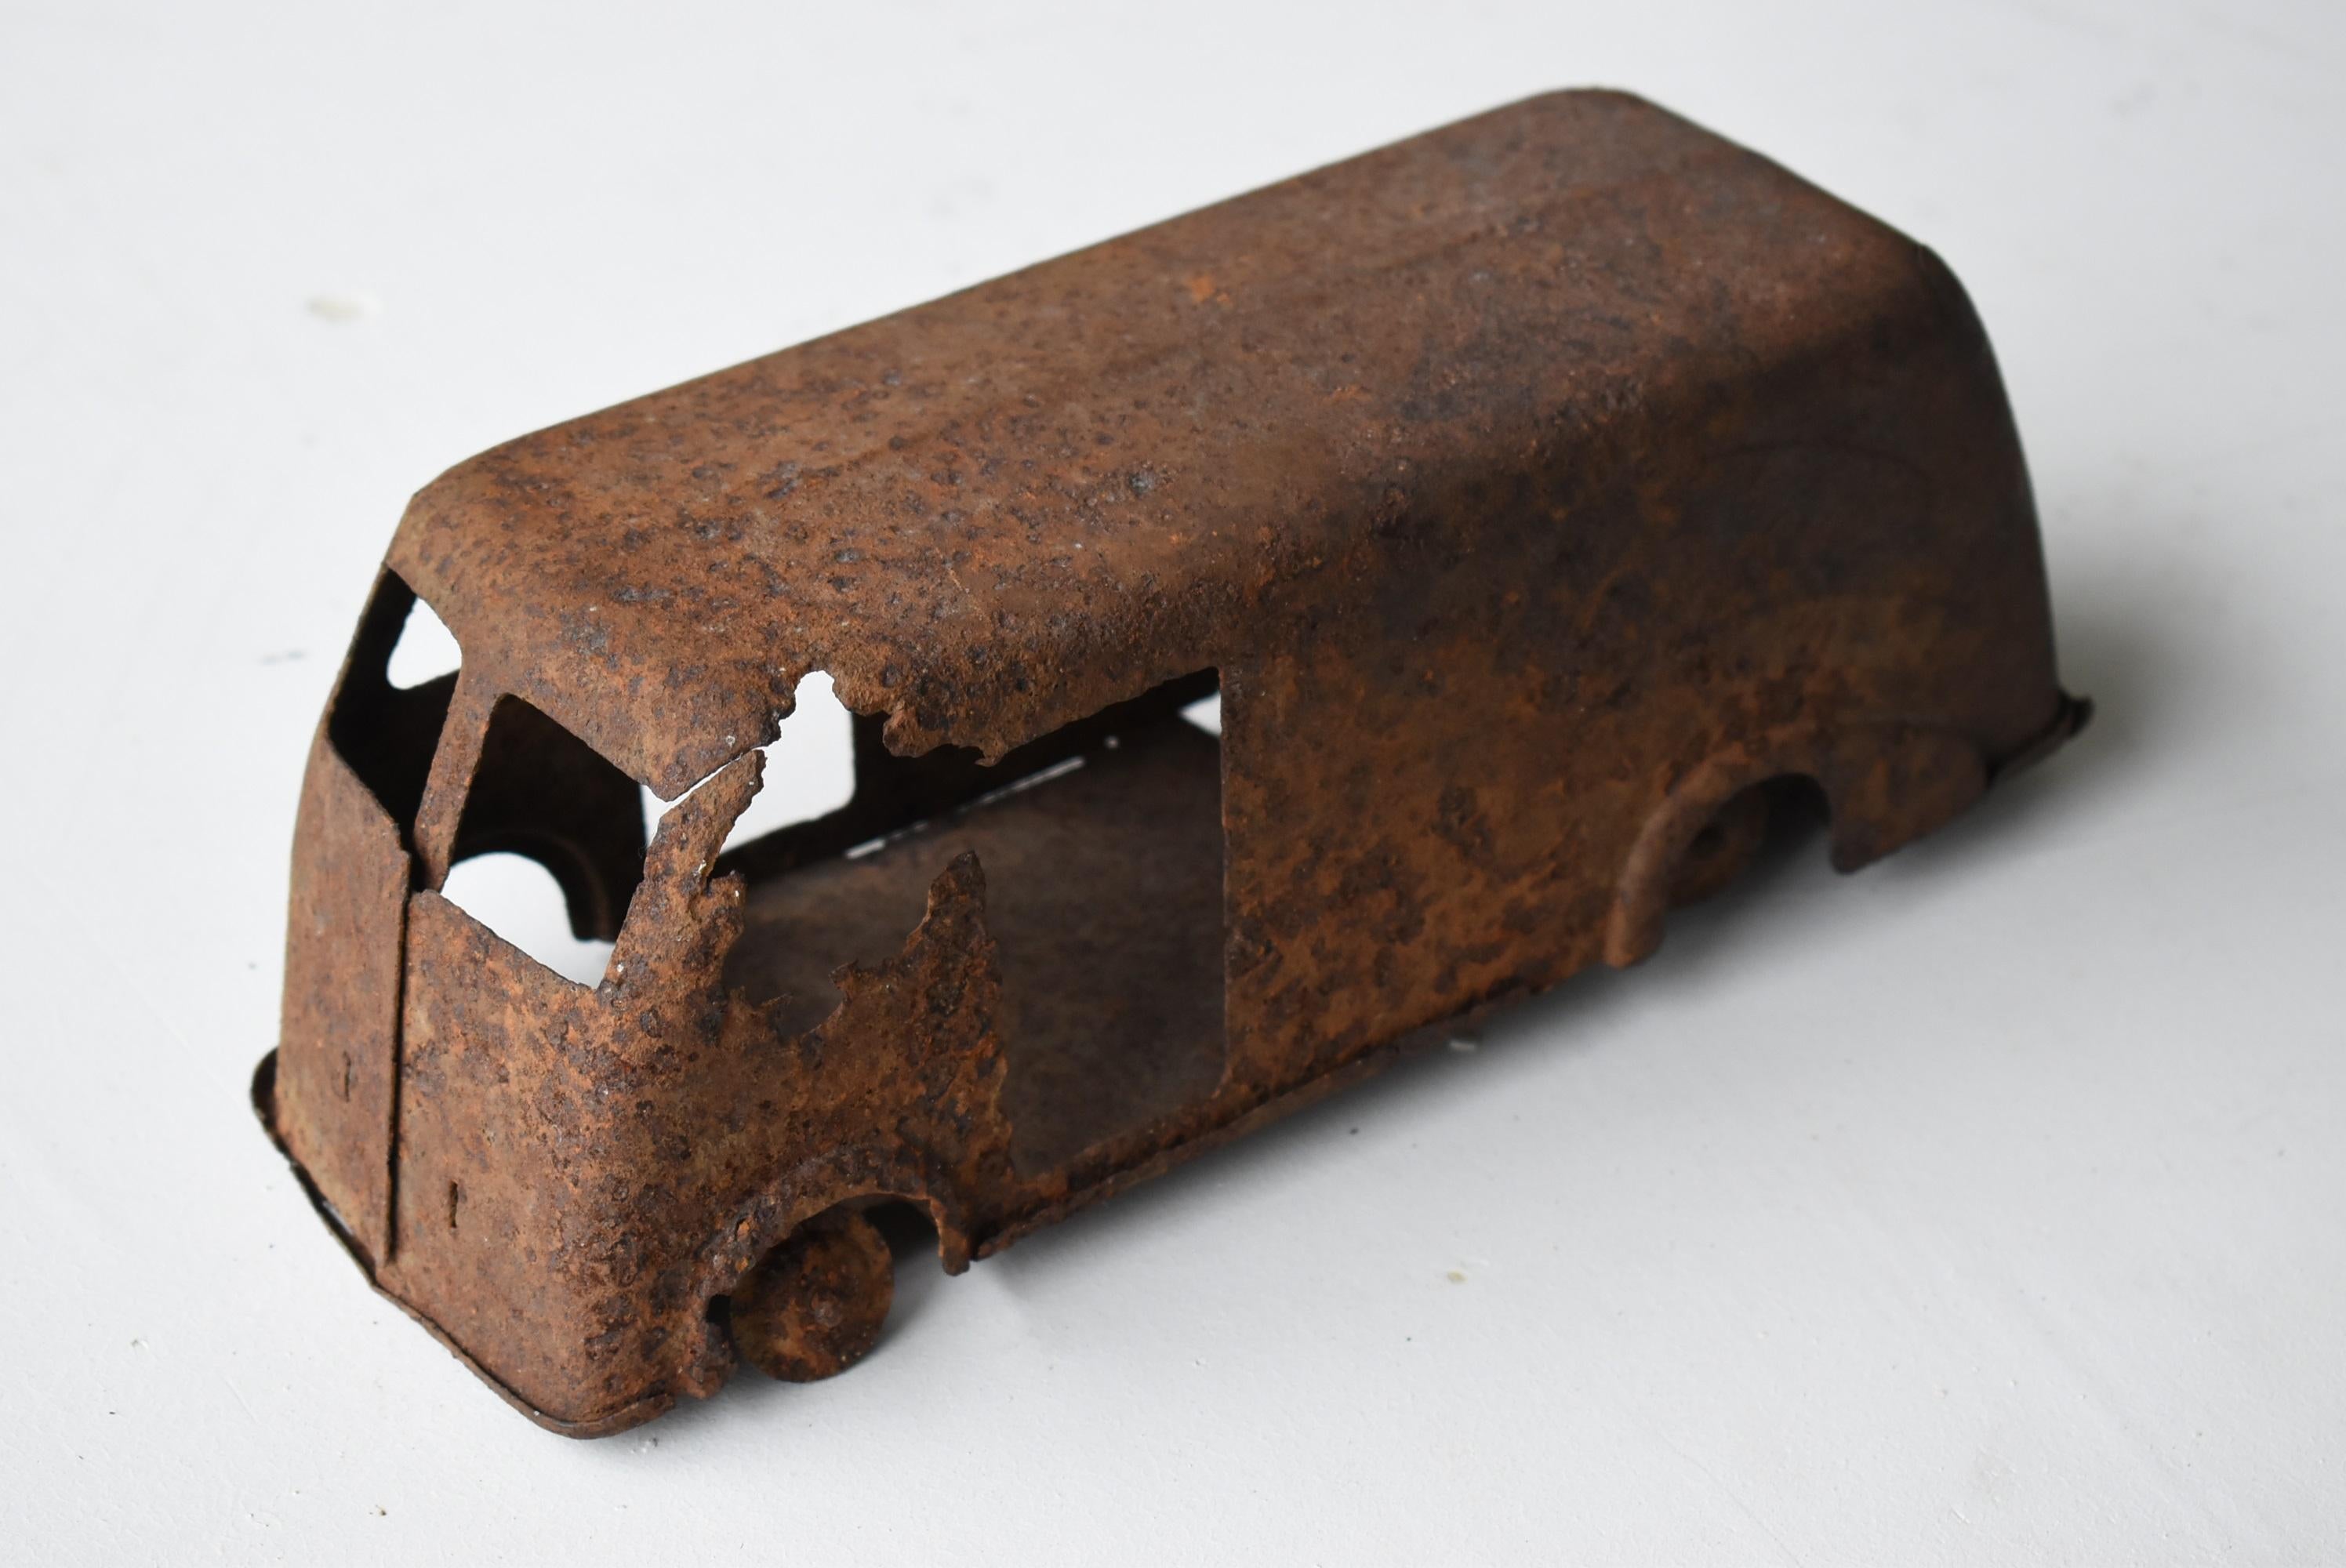 Japanese Old Rusted Car Toys 1940s-1970s/Vintage Iron Object Figurine Wabisabi 3